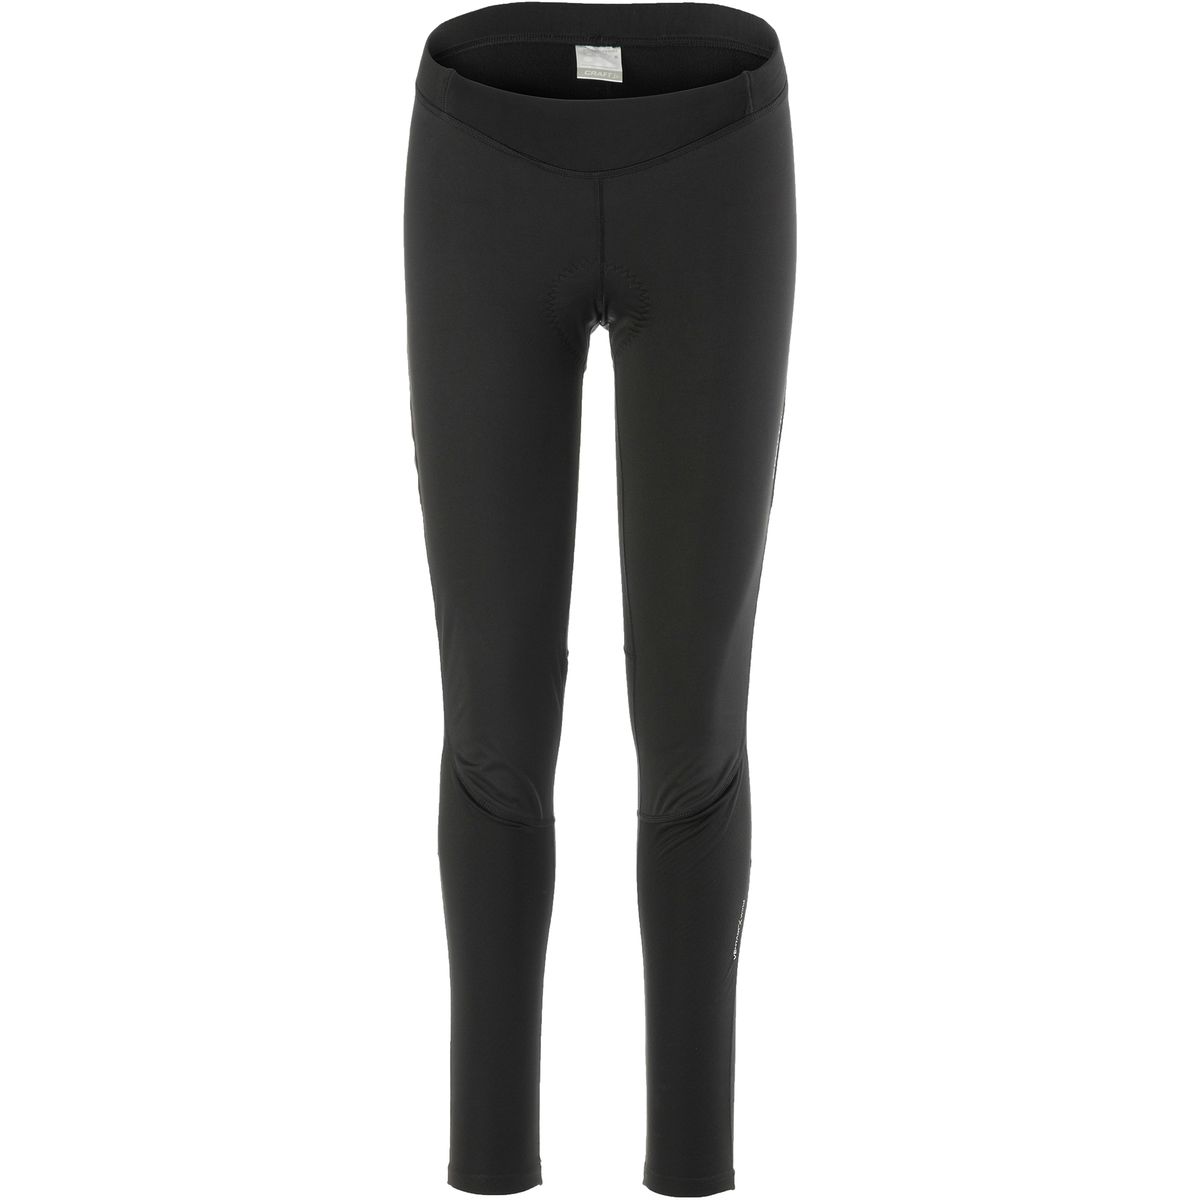 Craft Velo Thermal Wind Tight Women's